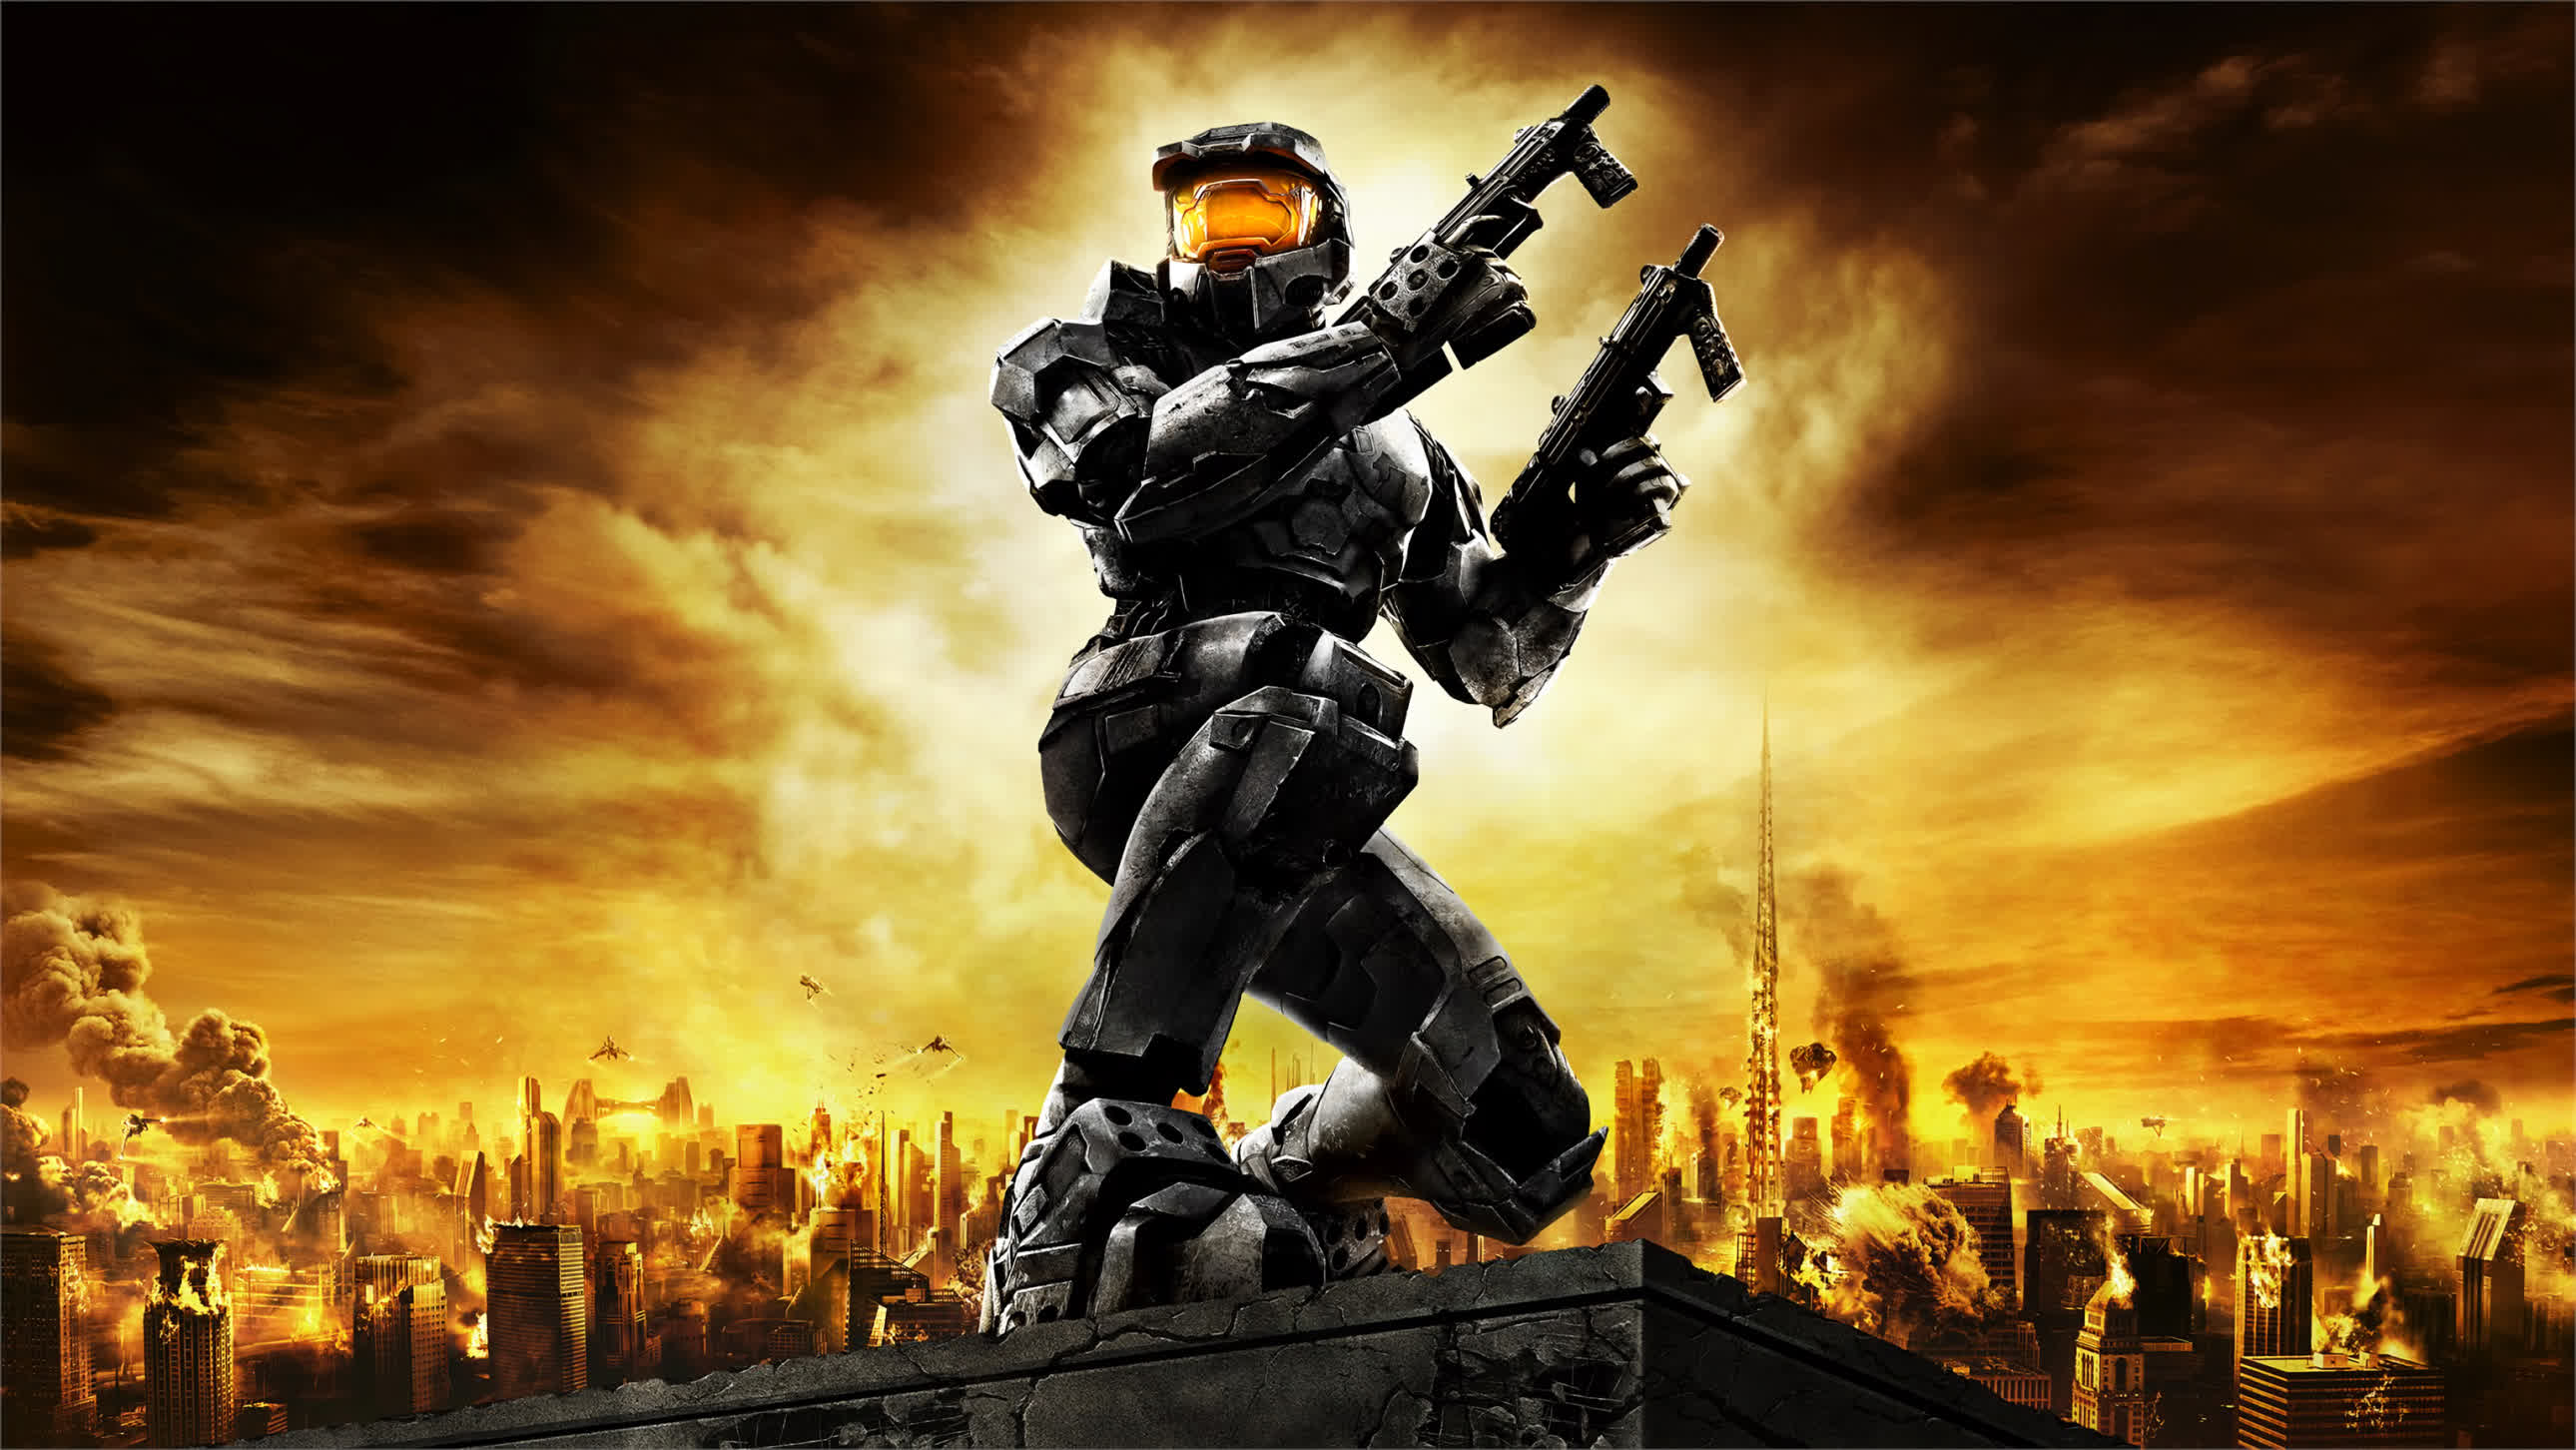 343 Industries is halting online services for Xbox 360 Halo games starting January 13